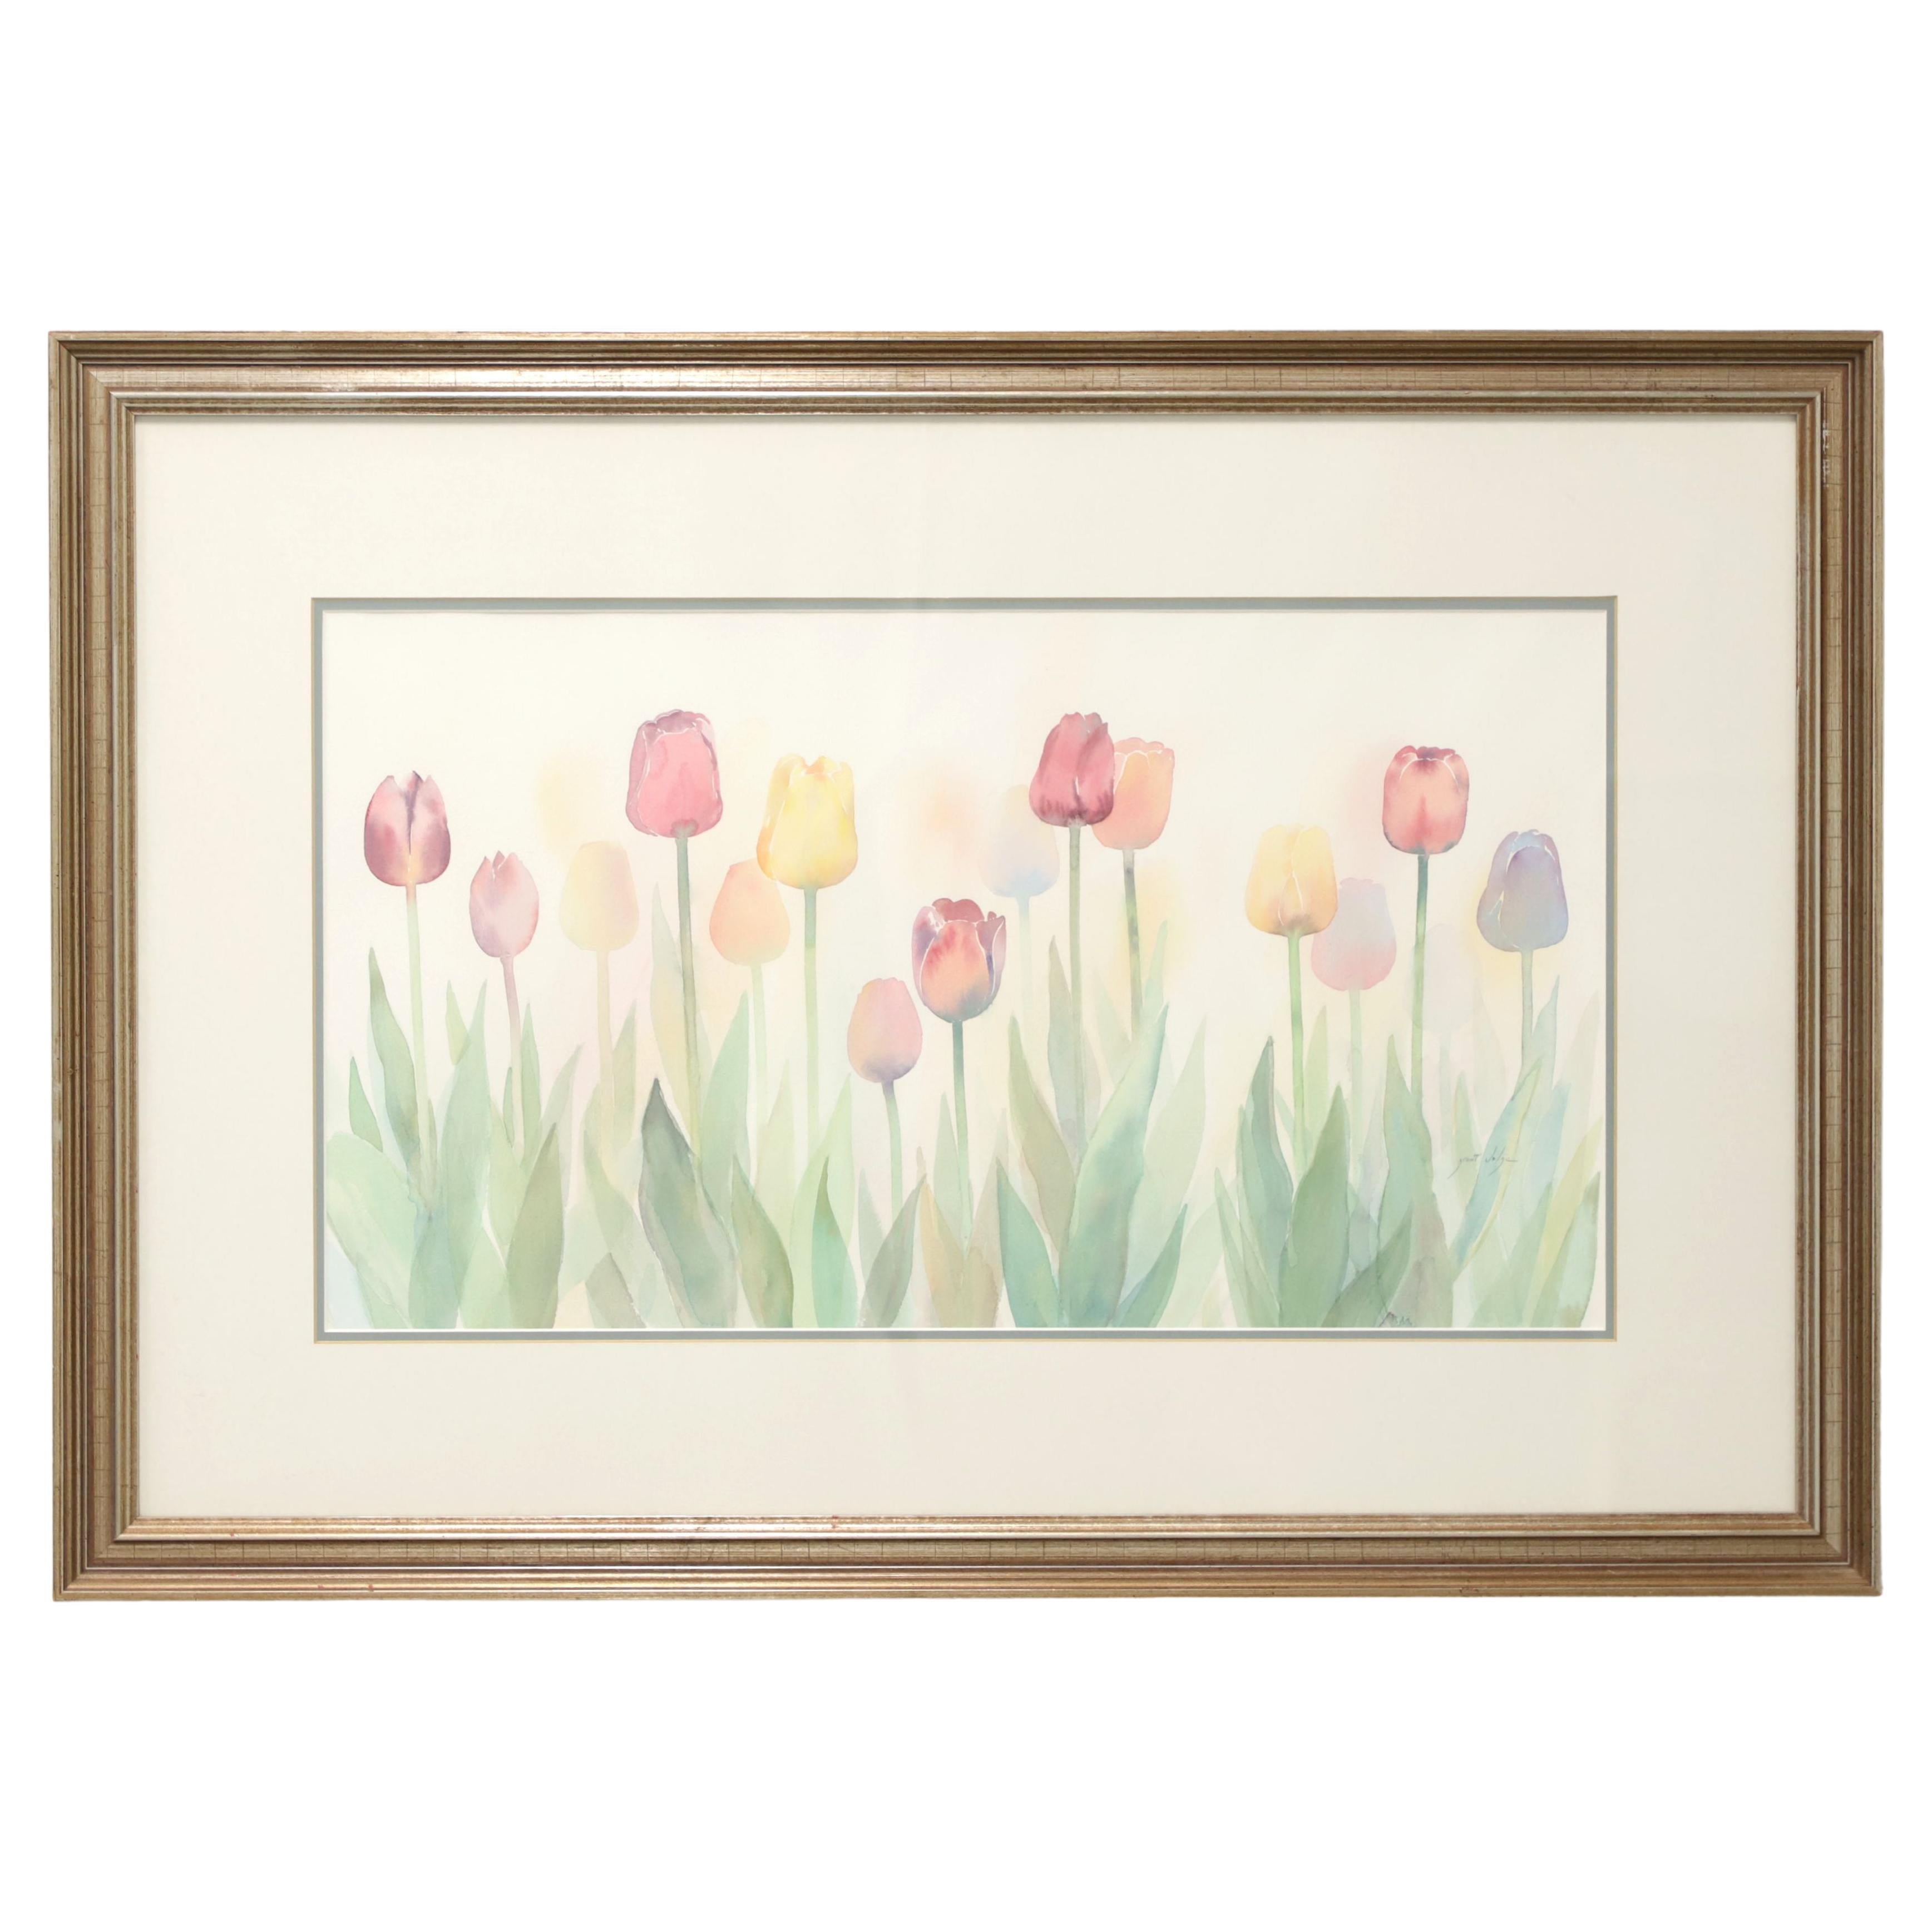 20th Century Original Watercolor Painting - Spring Tulips - Signed Grant Dolge For Sale